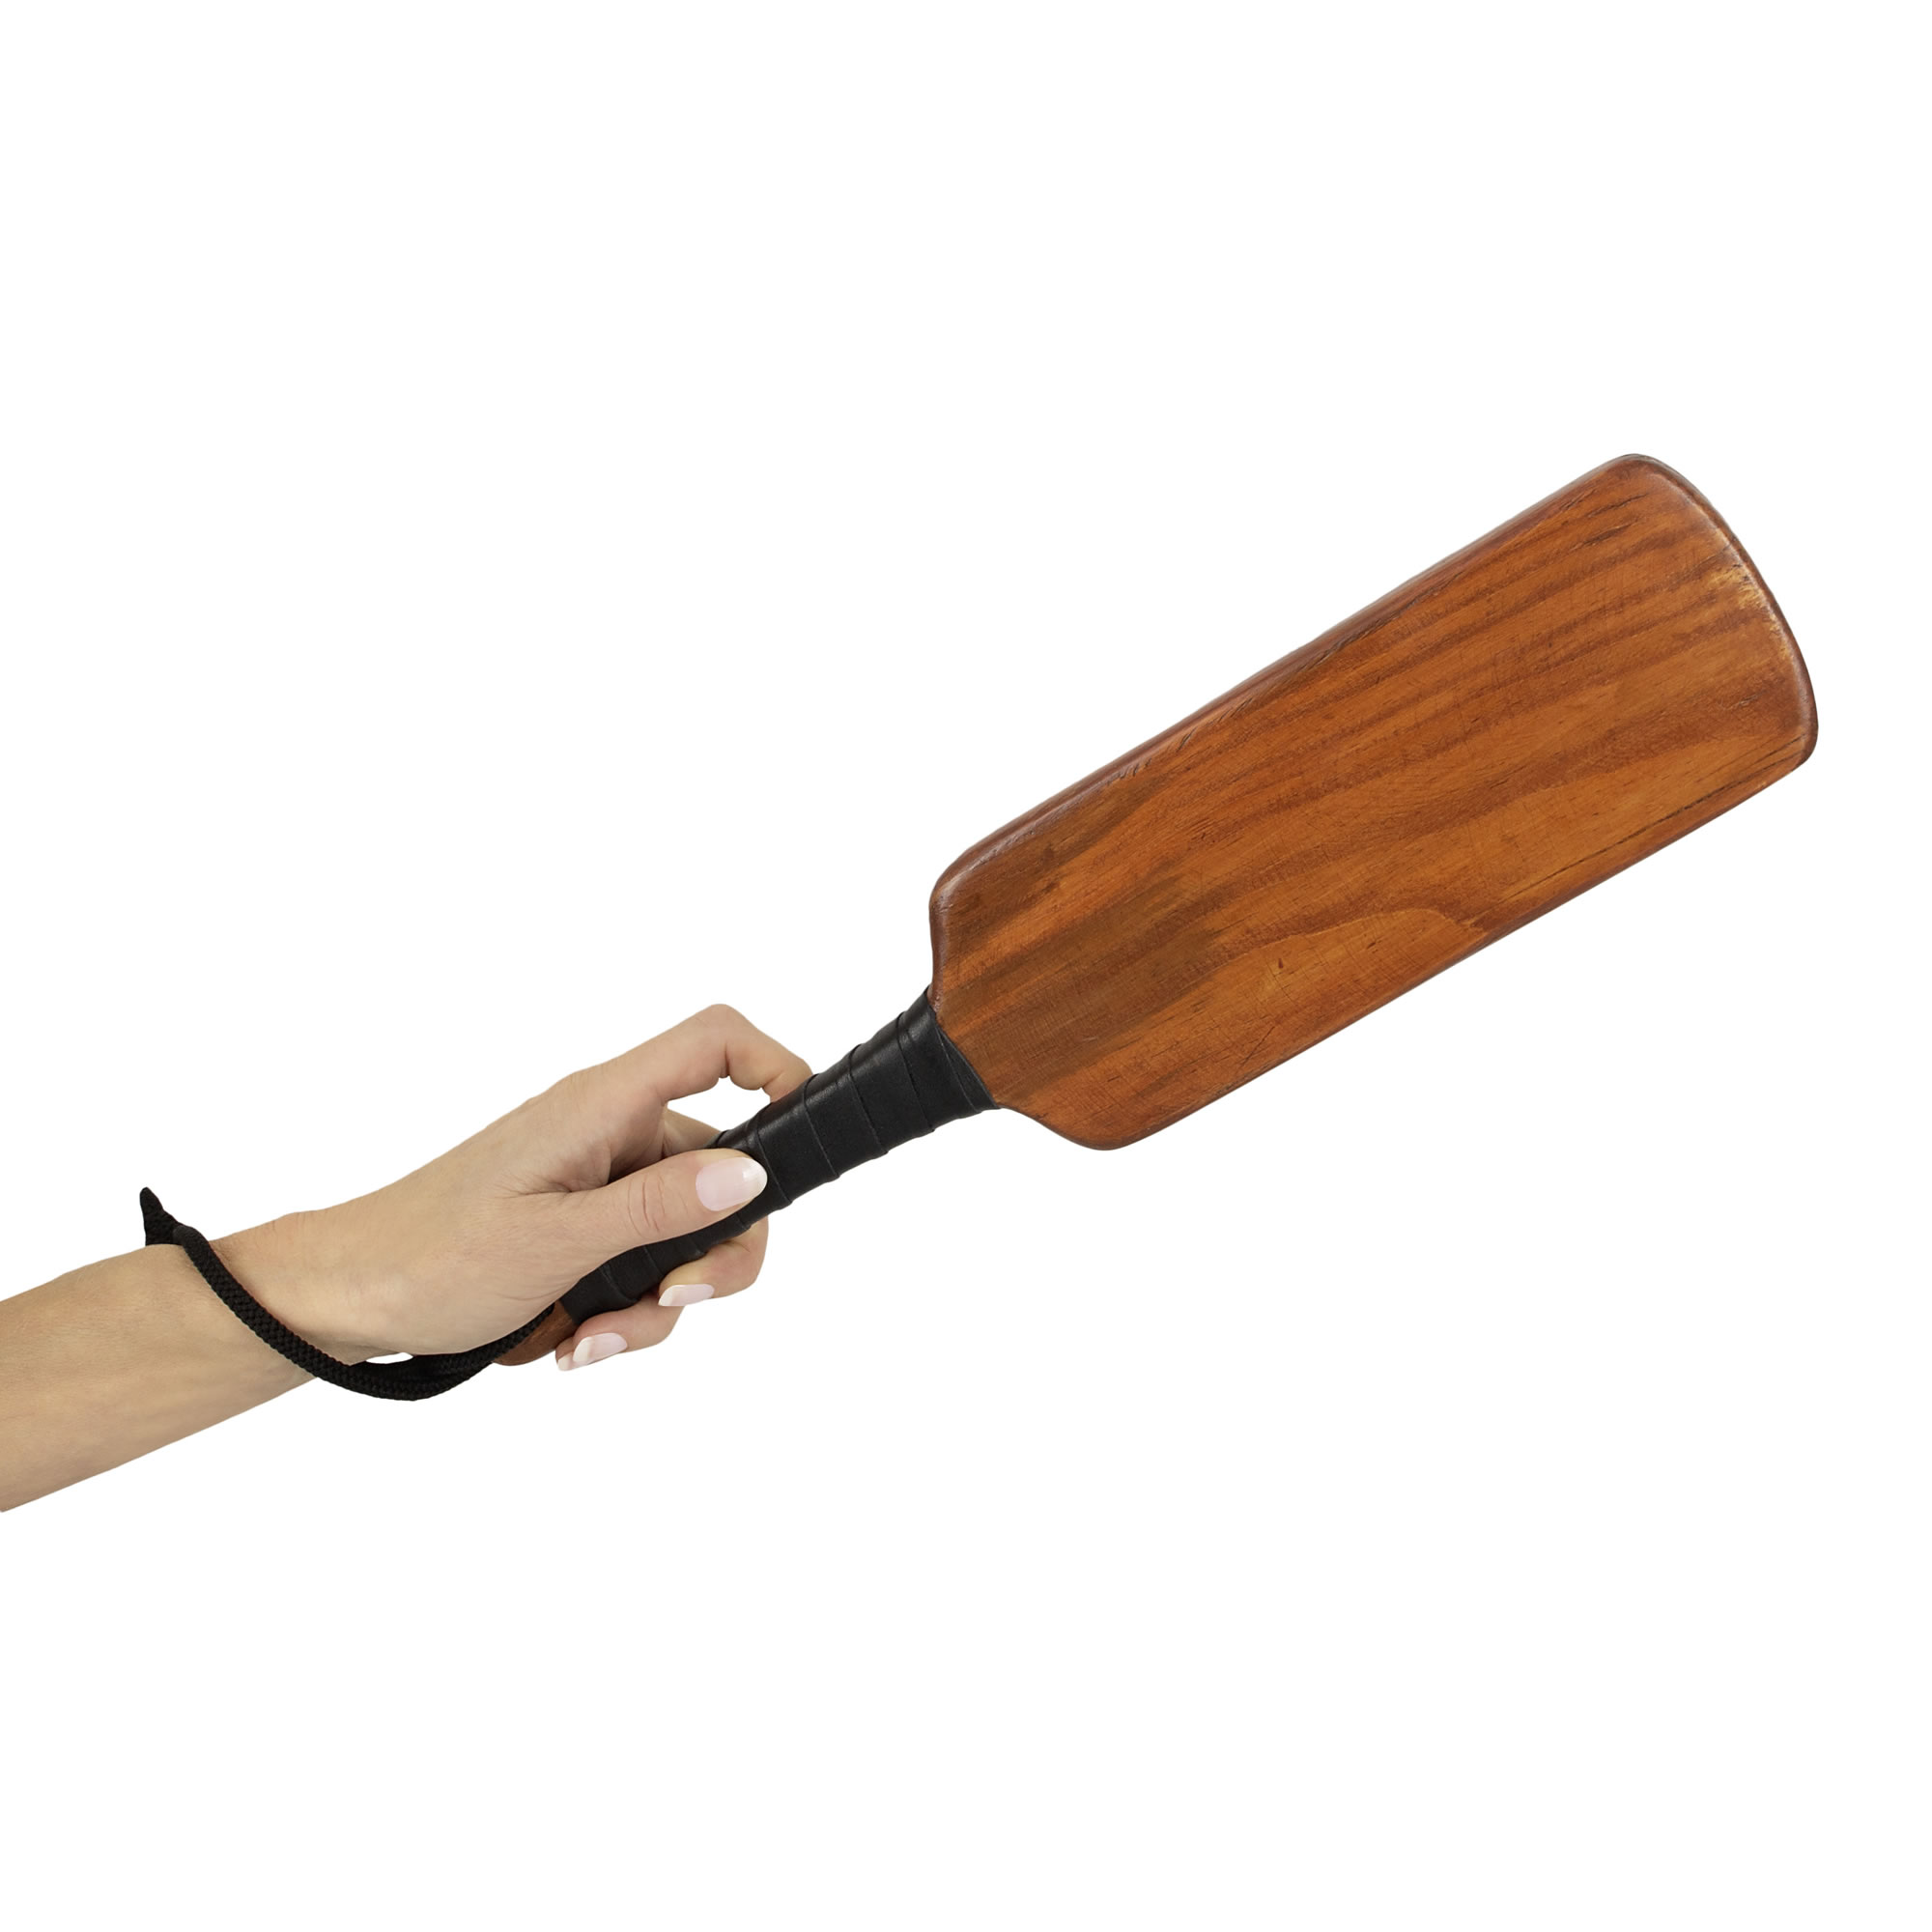 Spanking Paddle made of Wood with Leather Grip